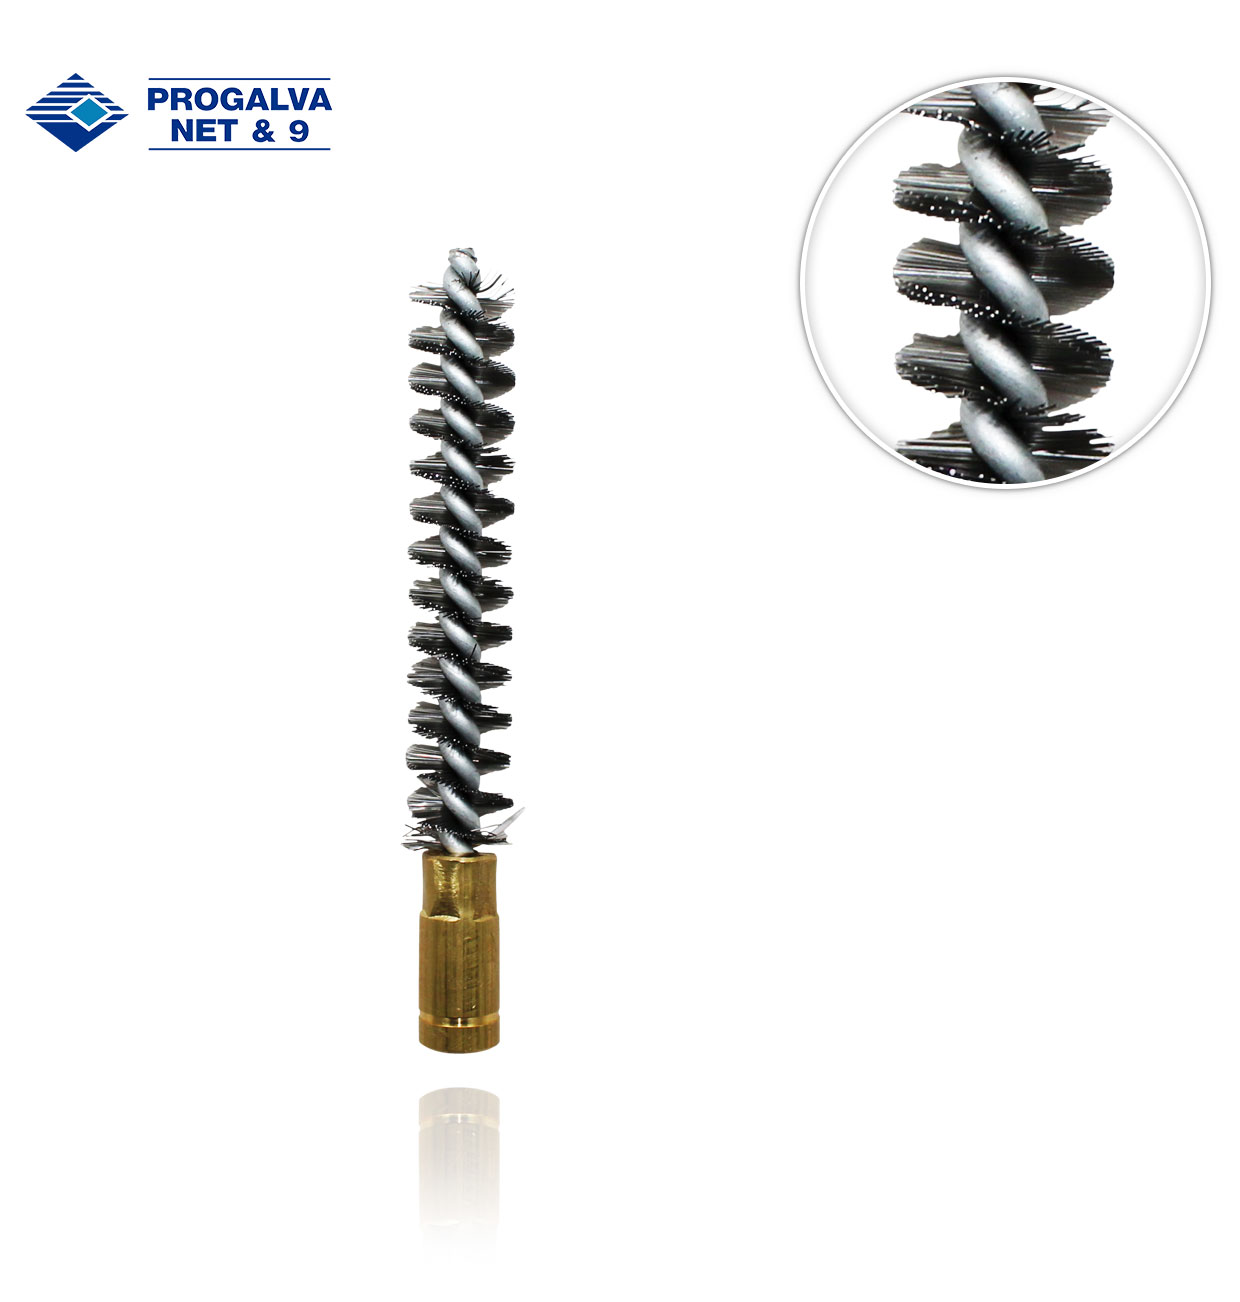 D16mm H8x125 ROUND BRUSH, TEMPERED STEEL WIRE AND GALVANISED CONNECTION TERMINAL.